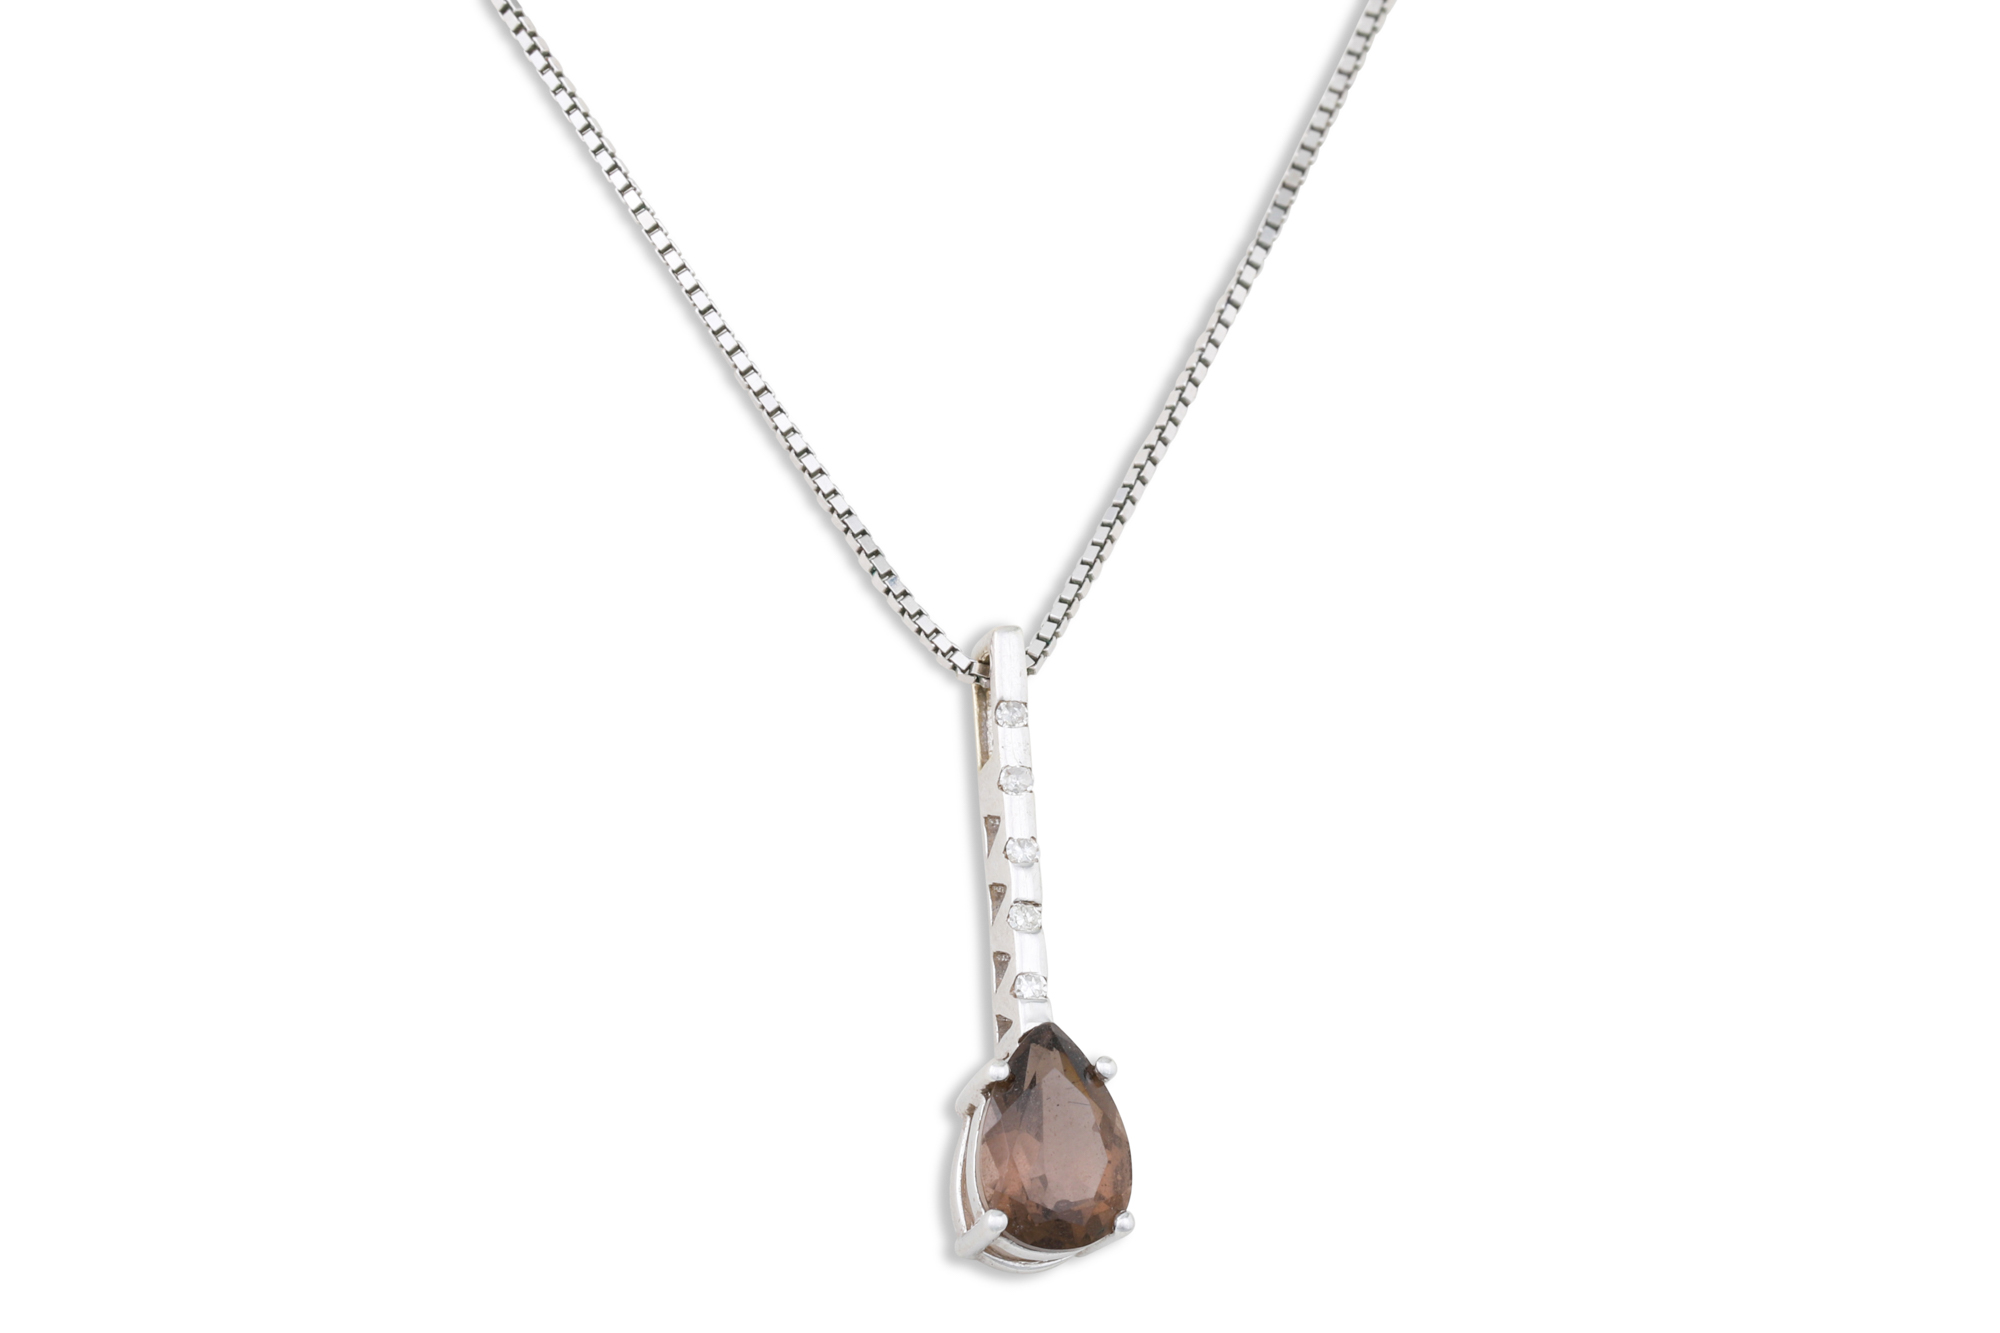 A DIAMOND AND SMOKY QUARTZ PENDANT, mounted in white gold, together with matching earrings - Image 2 of 3